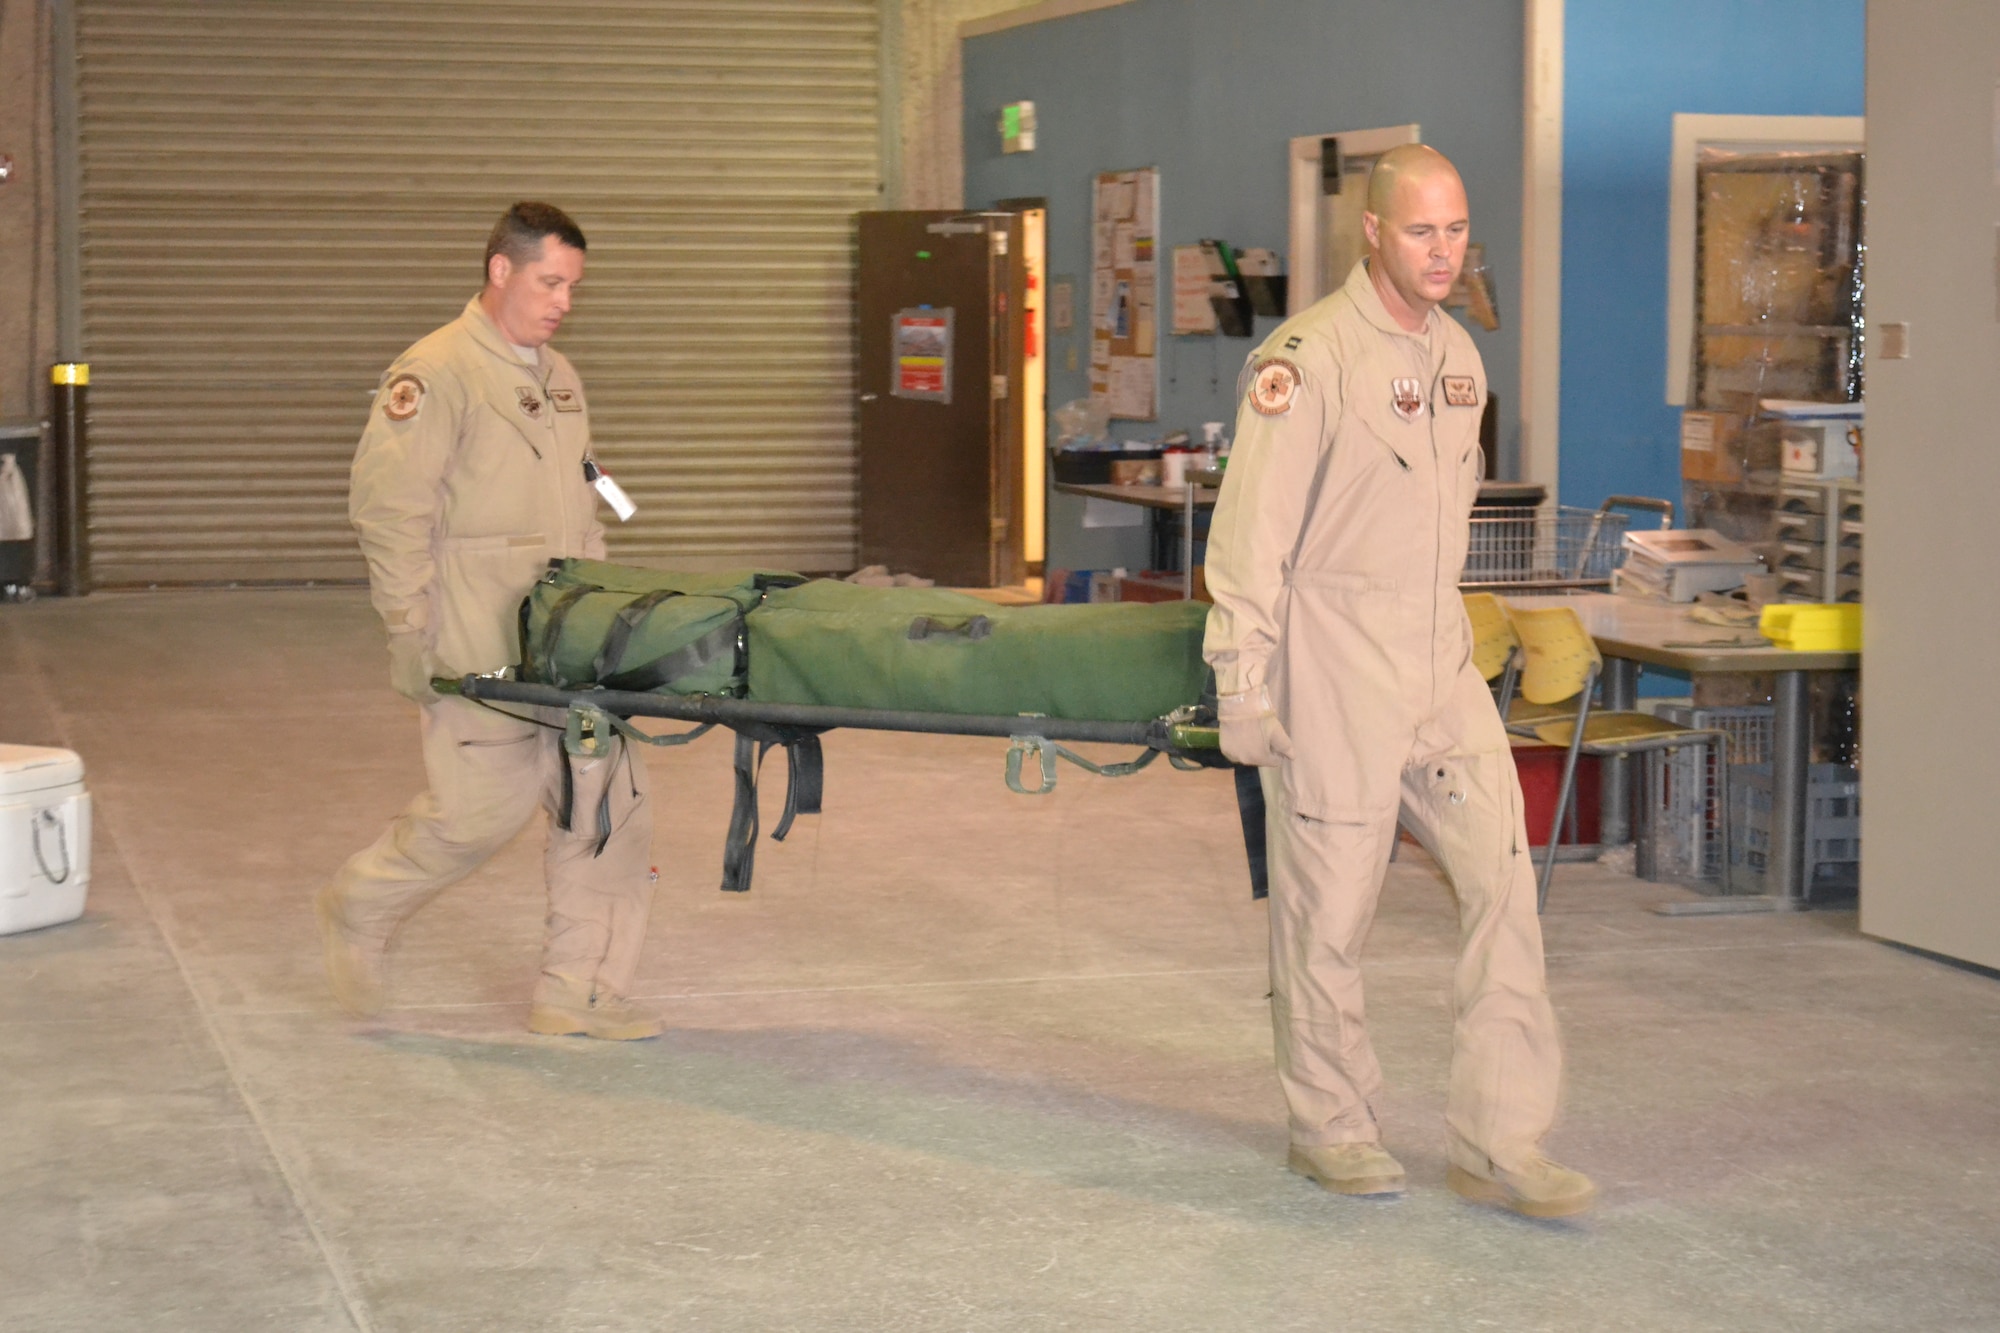 Capt. David Steiner and Technical Sgt. Christopher Caplan, a nurse and medical technician with the 379th Expeditionary Aeromedical Evacuation Squadron, carry an emergency equipment litter in preparation for an AE mission in support of Operation Enduring Freedom, April 16, 2014, Al Udeid Air Base, Qatar.  A crew of two nurses and three medical technicians inspect all emergency equipment litters and medical supplies prior to loading and configuring it on the aircraft to ensure all power operated equipment is running properly and that they have supplies for any and all types of medical emergencies.  Steiner is deployed from the Wyoming Air National Guard and a Fort Collins, Colo. native.  Caplan is a native of Orting, Wash. and deployed from Joint Base Lewis-McChord, Wash.  (U.S. Air Force photo by Maj. Nicole David) 